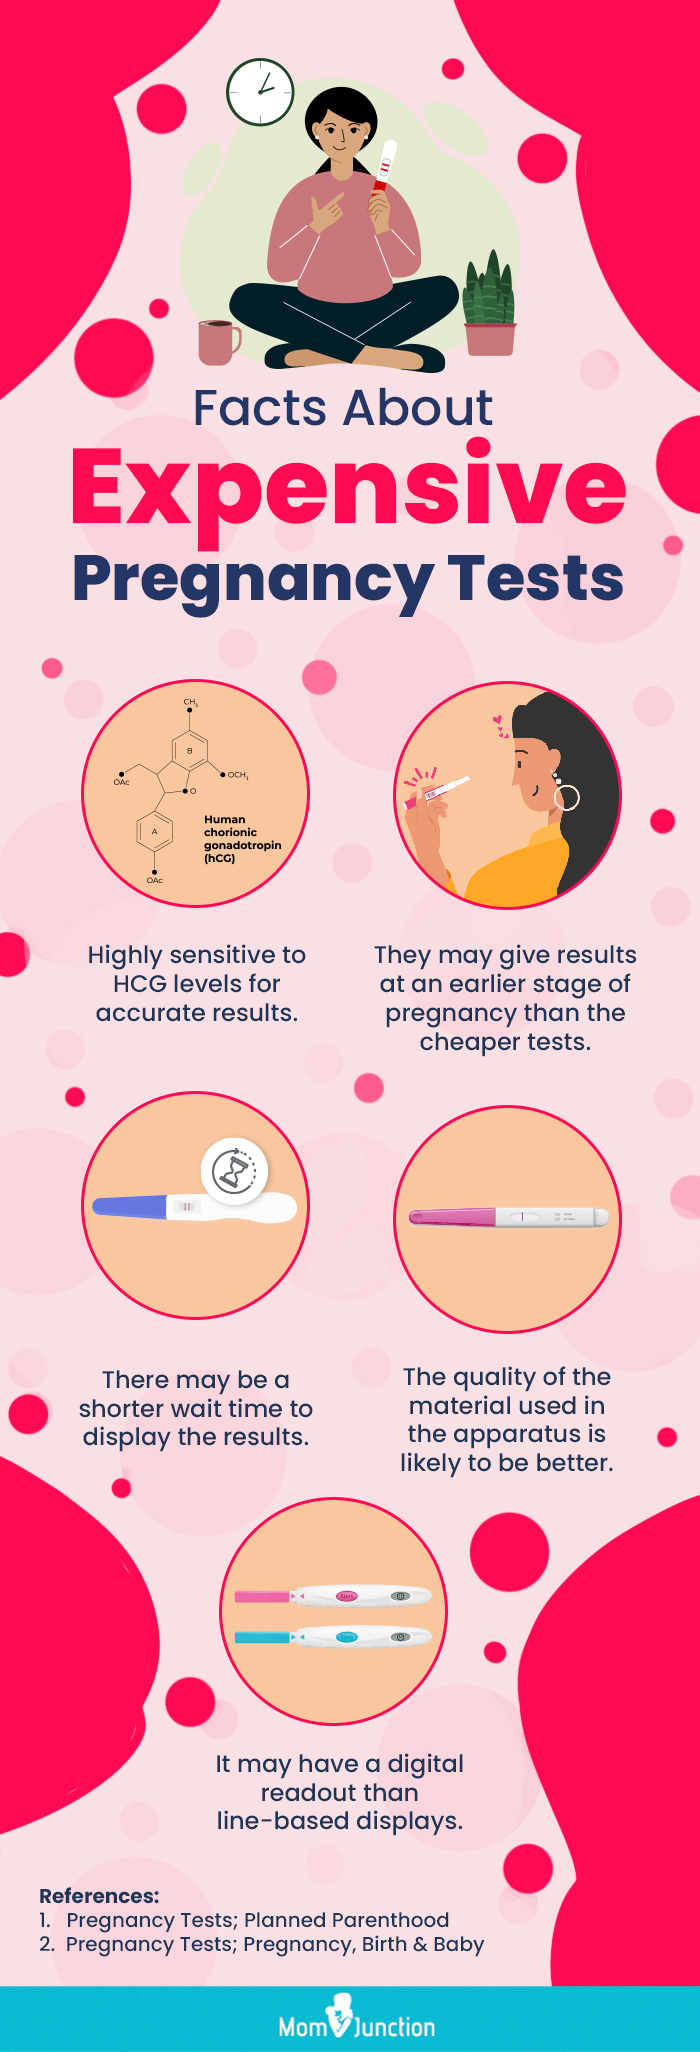 complications of untreated rectal bleeding in pregnancy (infographic)